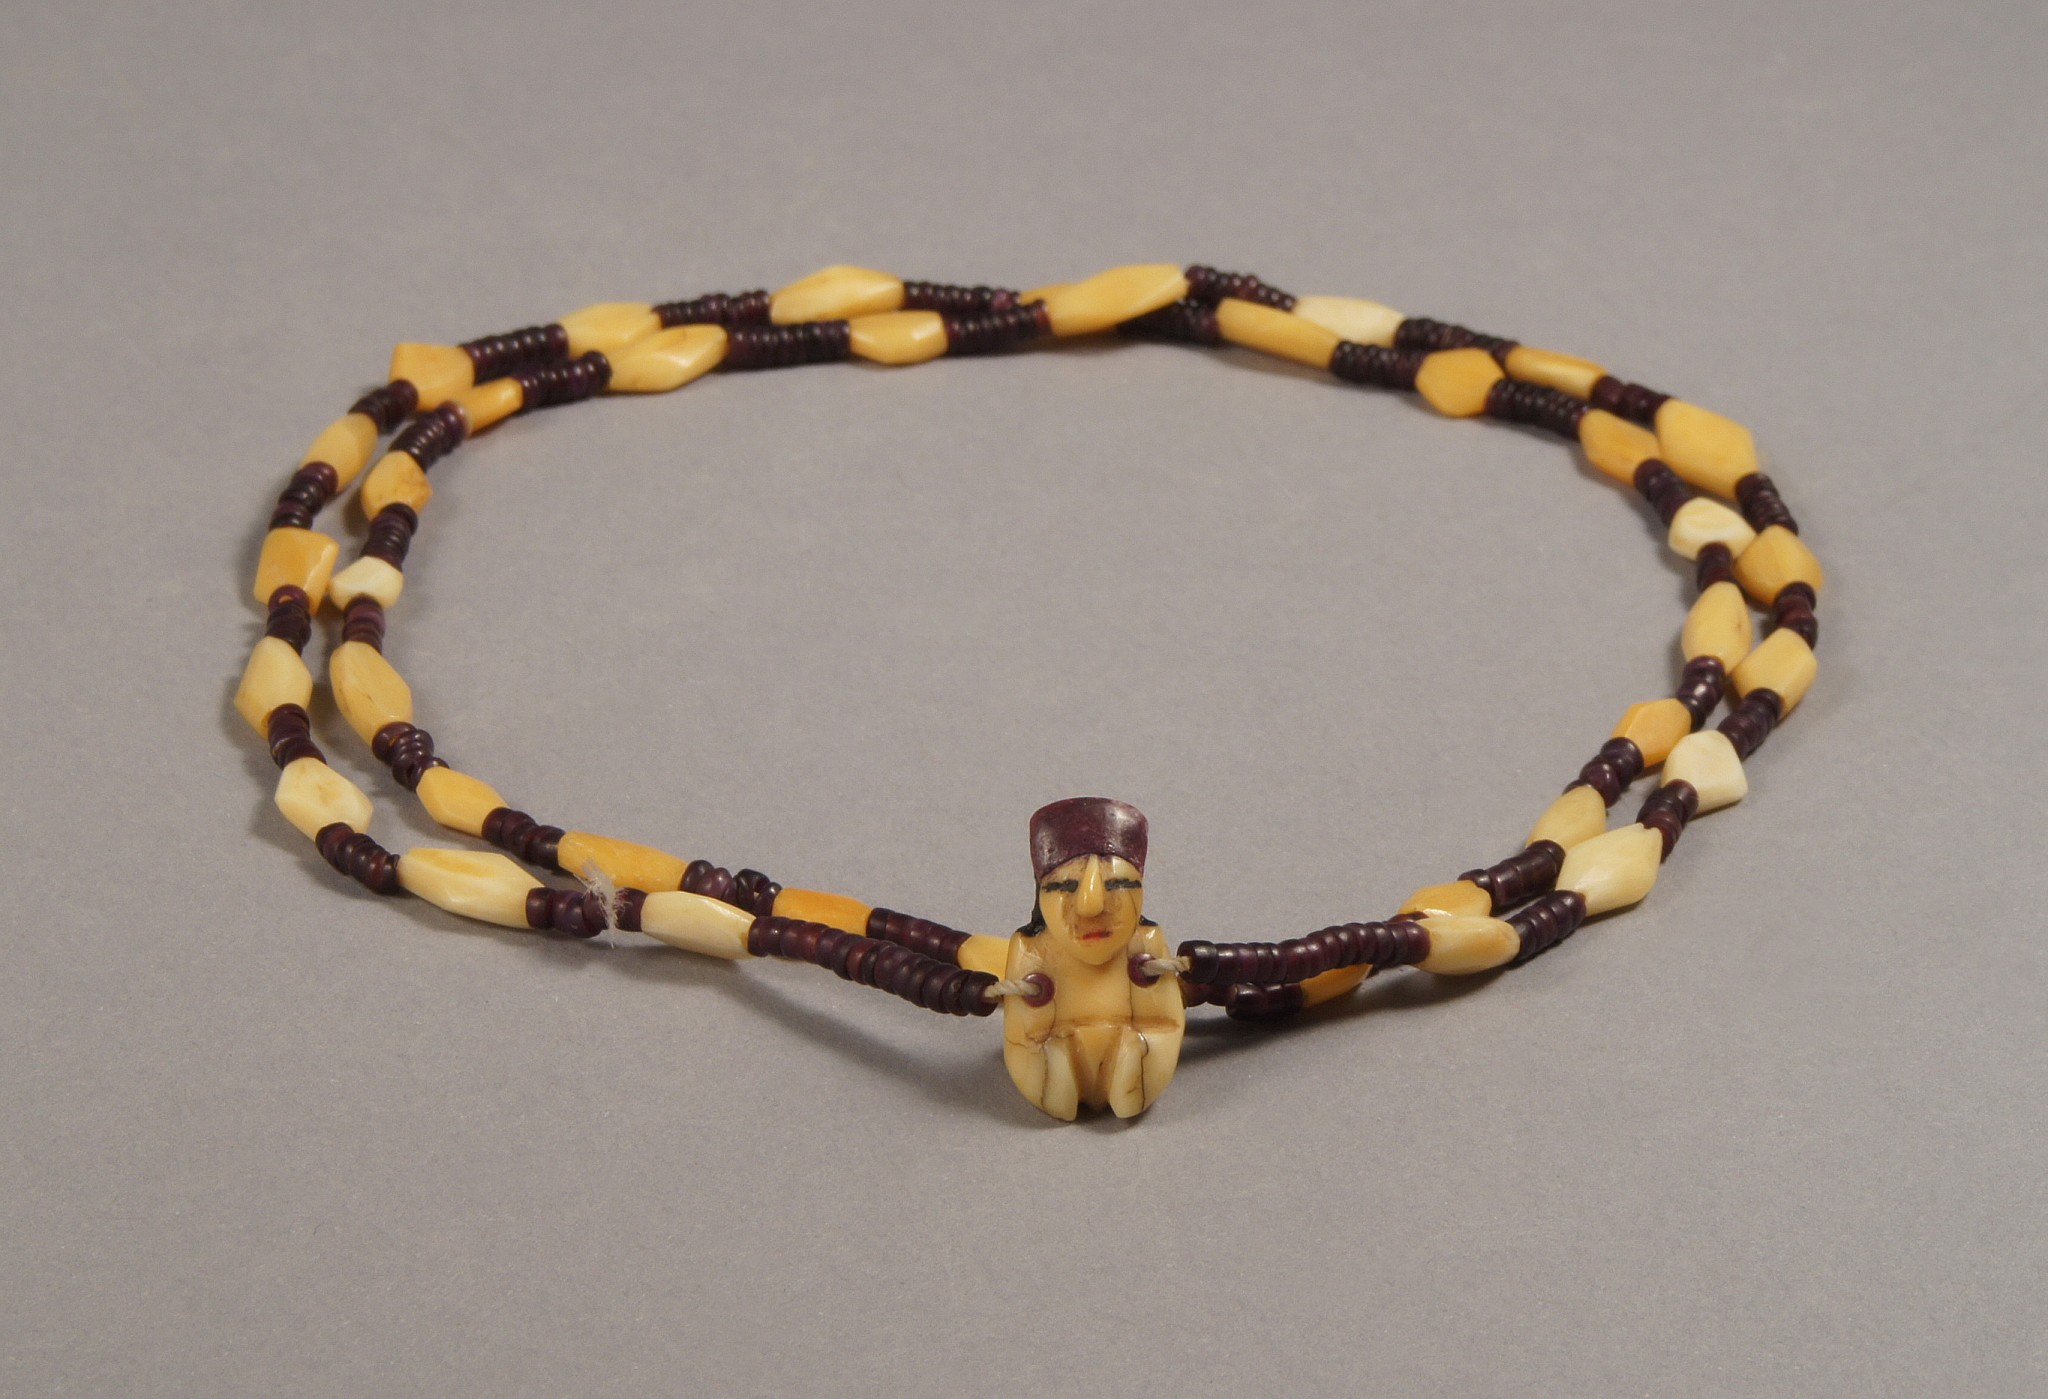 Peru, Nazca necklace with bone and syondylus beads and a minature female pendant
The necklace is made of 32 carved bone beads separated by 6 dark purple circular beads. The pendant is a classic Nazca miniature carved female with traces of painted eyes and mouth. The head piece of purple shell is missing. It's possible that the pendant is made up of Whale tooth ivory.  A similar type of figurine is illustrated in 'Miniature Size, Magical Quality - Nasca Art from the Glassell Collection', Marzio, pg 59; and in 'The Inka Empire And Its Andean Origins', Morris and Von Hagen, p.87.
Media: Bone
Dimensions: Length 68 cm.  size of pendant H.1.4cm W. 5cm
$6,500
N1010